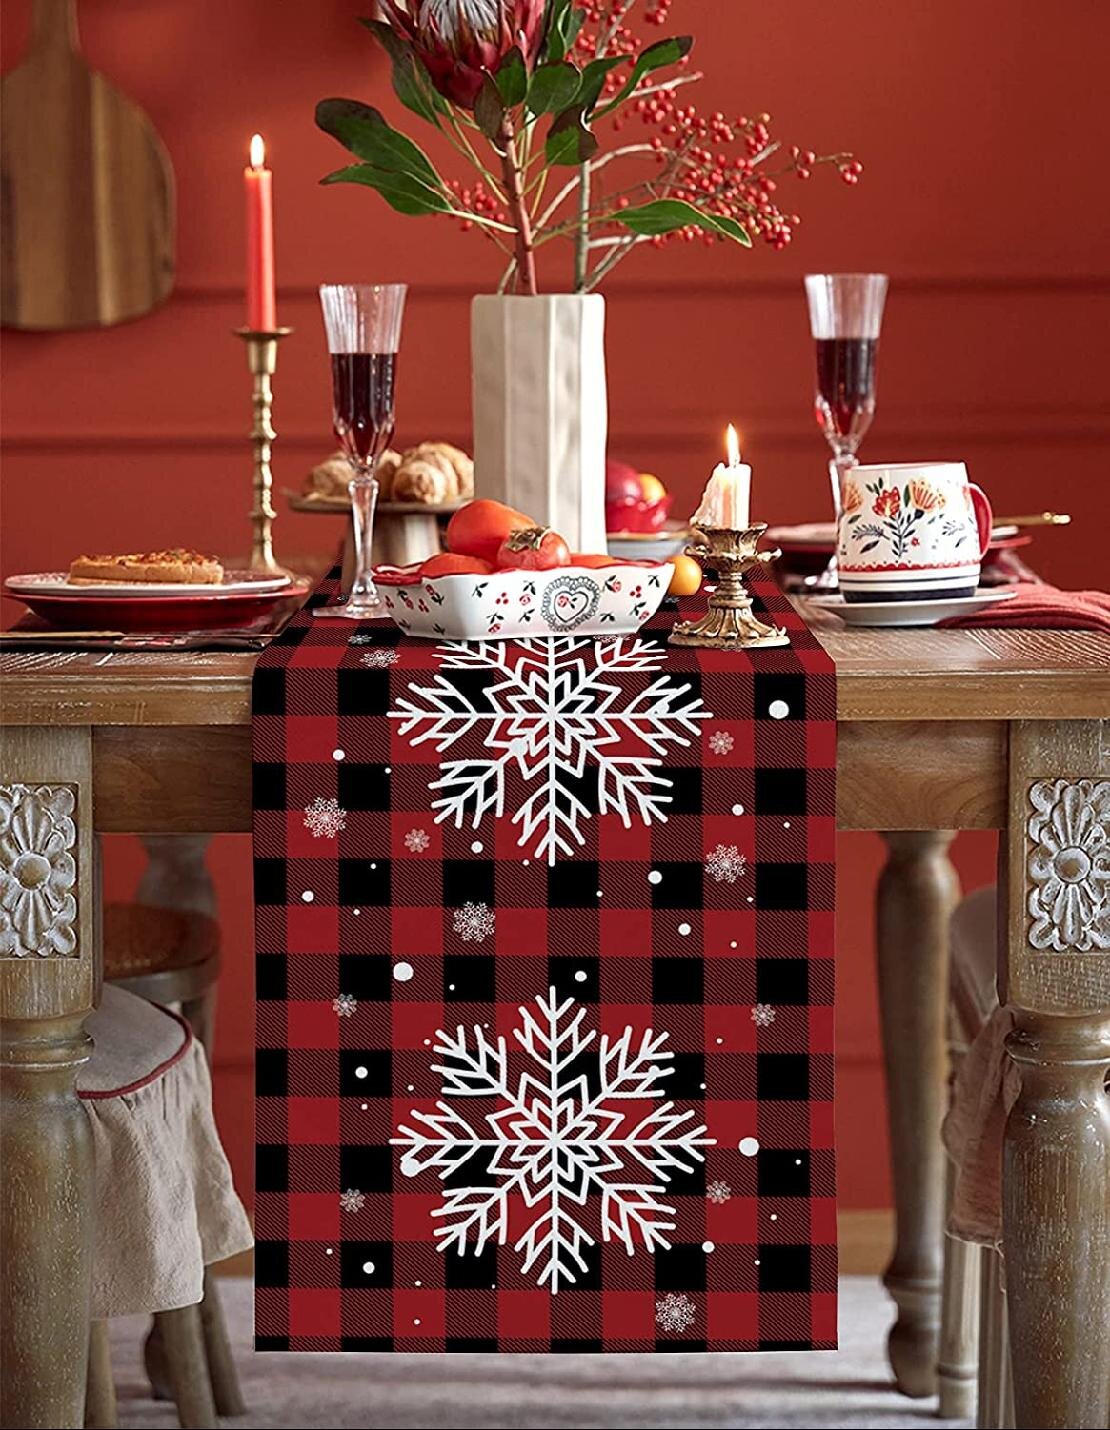 Oarencol Christmas Skull Table Runner Santa Hat Snowflake 13x90 inch Table Cover for Kitchen Party Holiday Dining Home Everyday